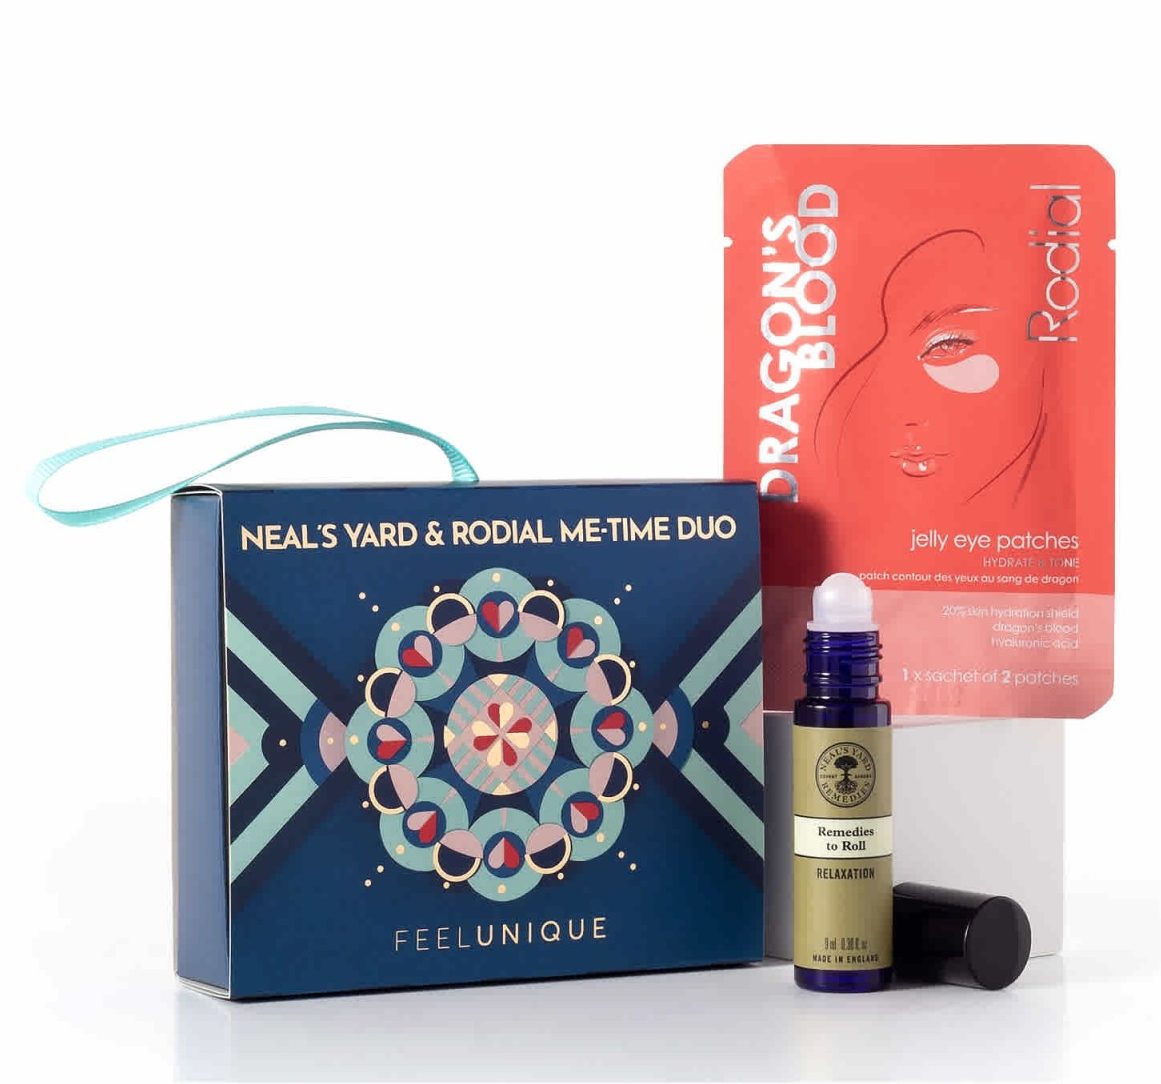 Neal's Yard & Rodial Me-Time Duo